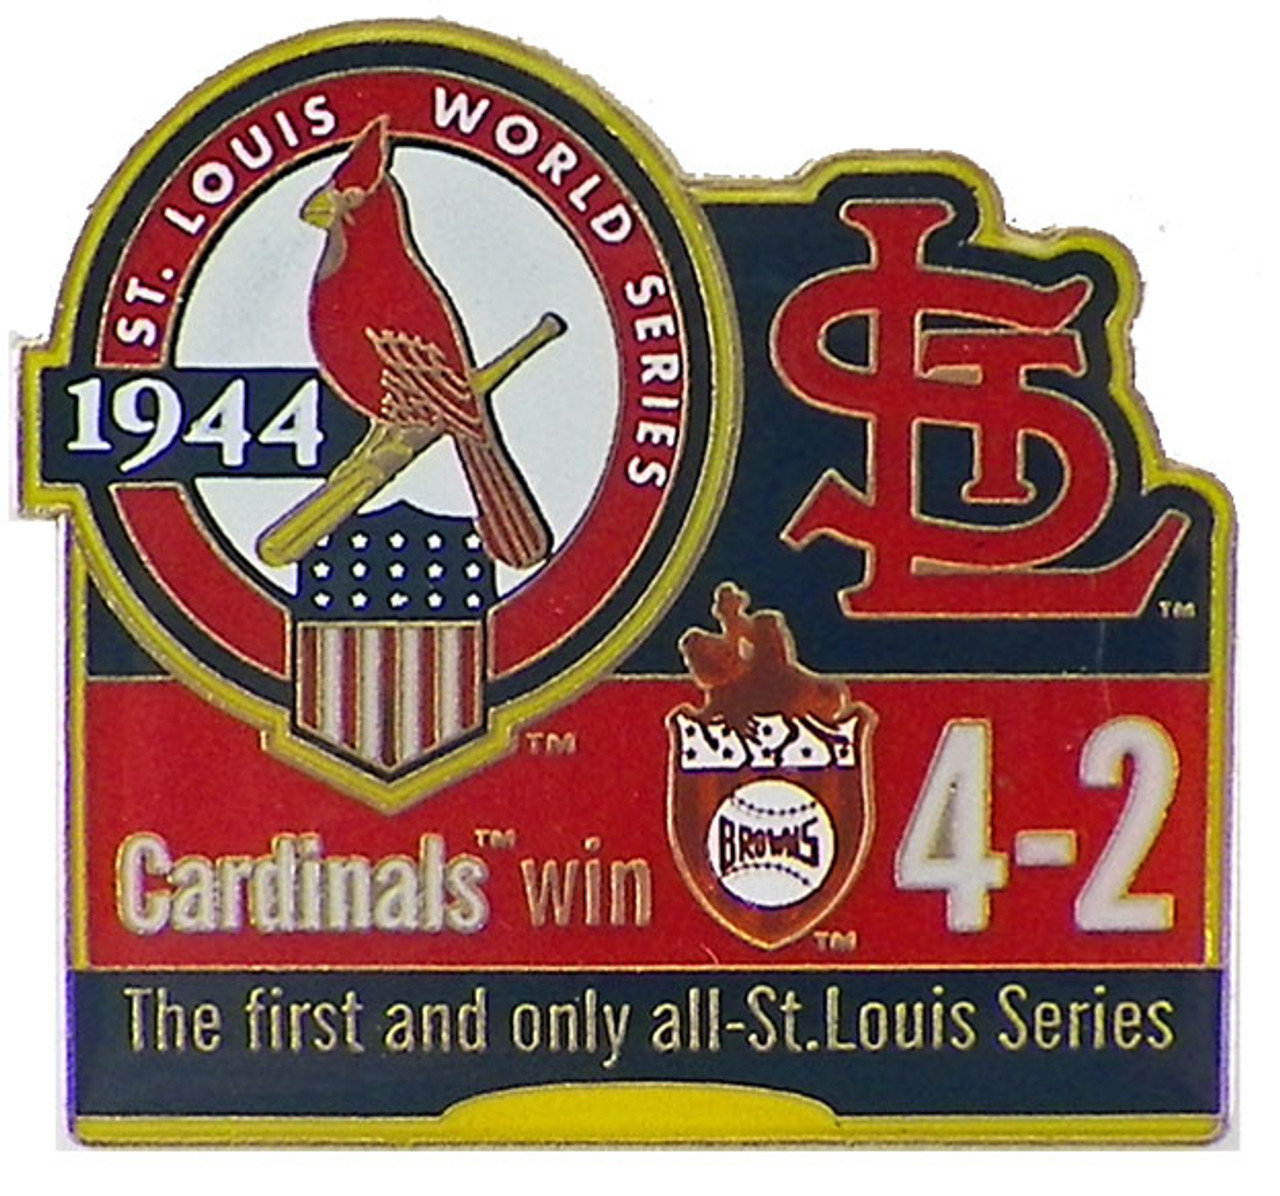 St. Louis Cardinals MLB Commemorative Pin Collection Featuring 21